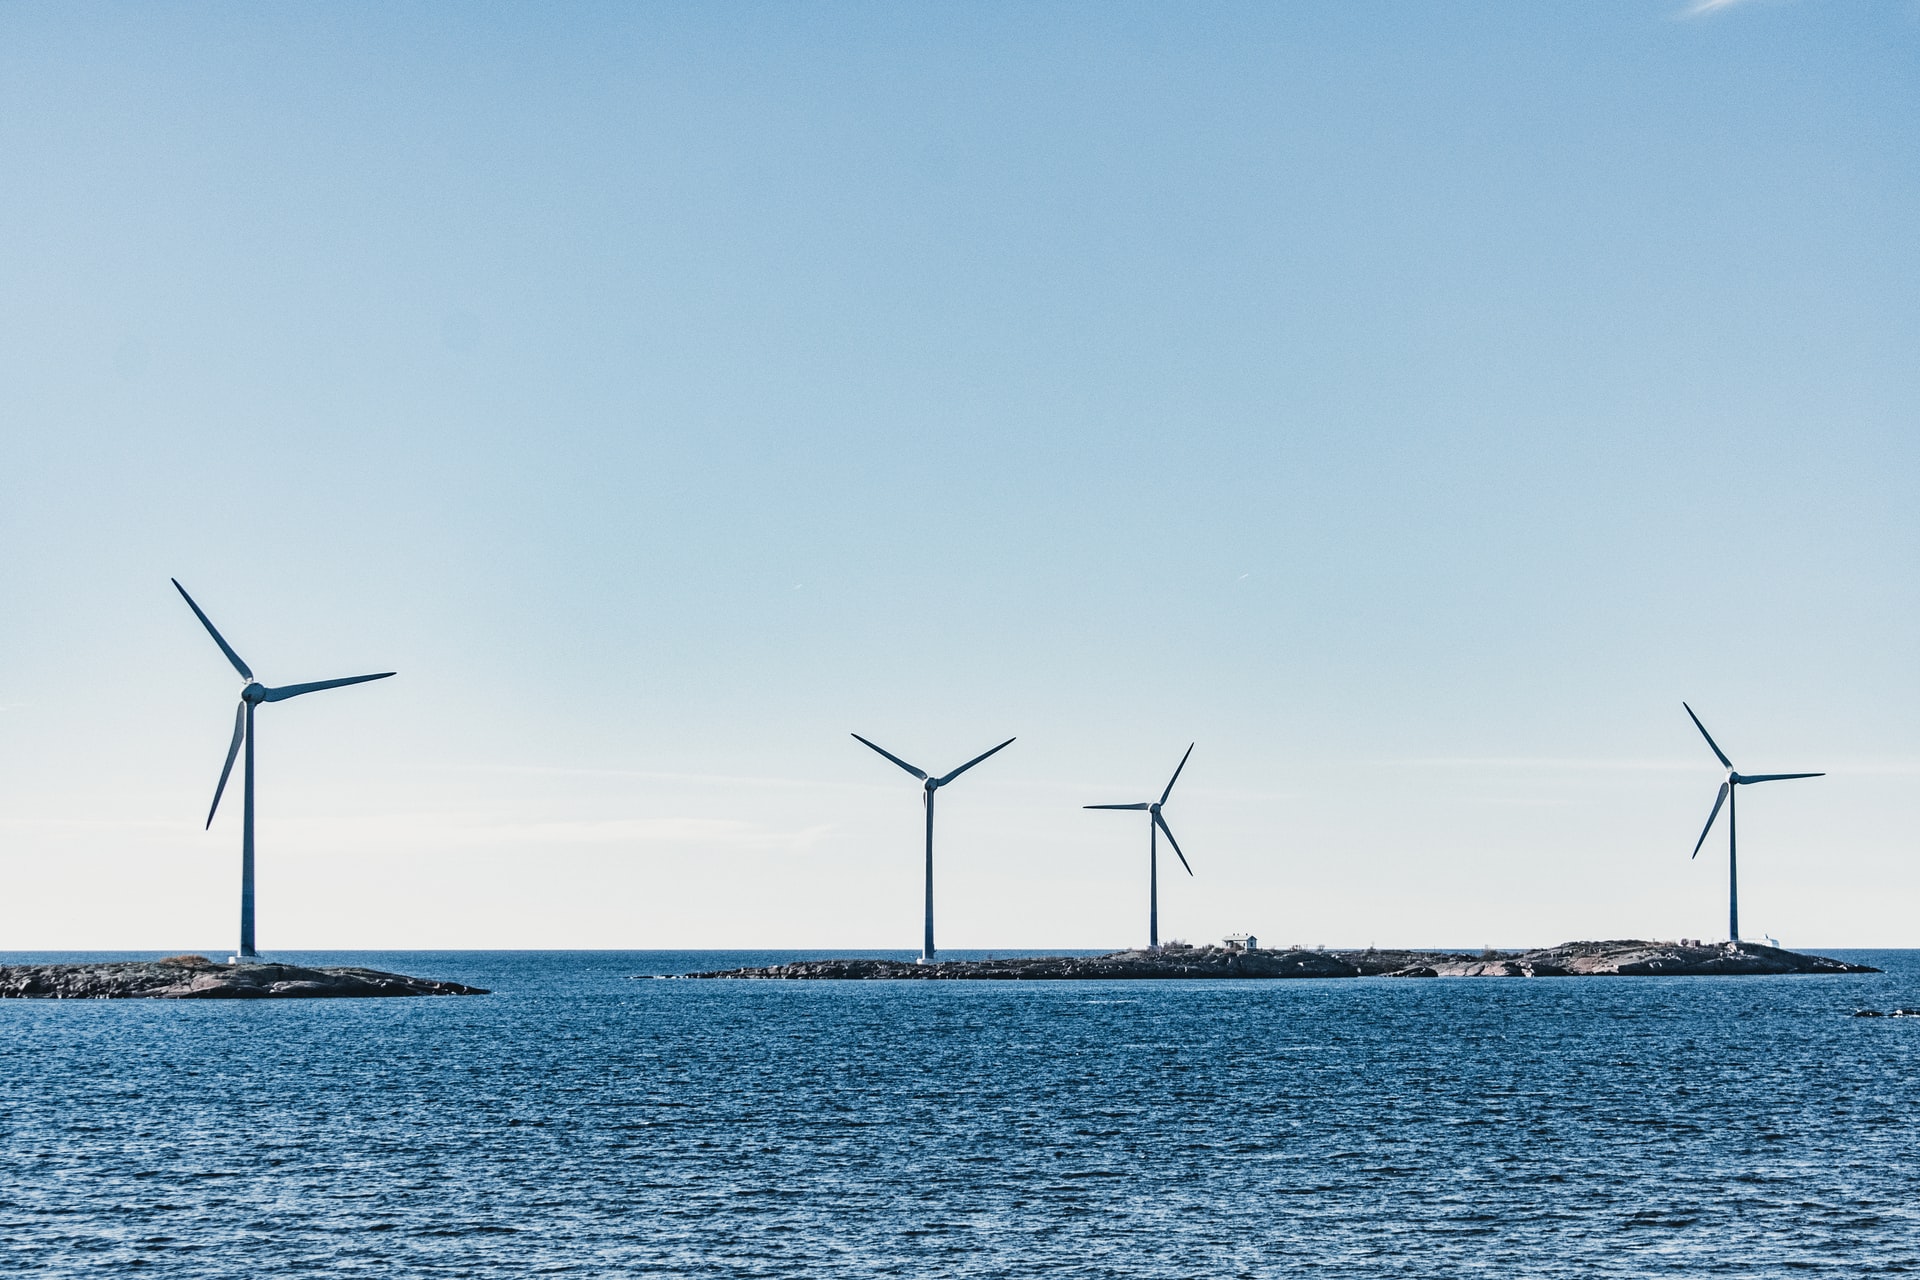 Offshore wind turbines will likely line Maryland’s coast by 2026